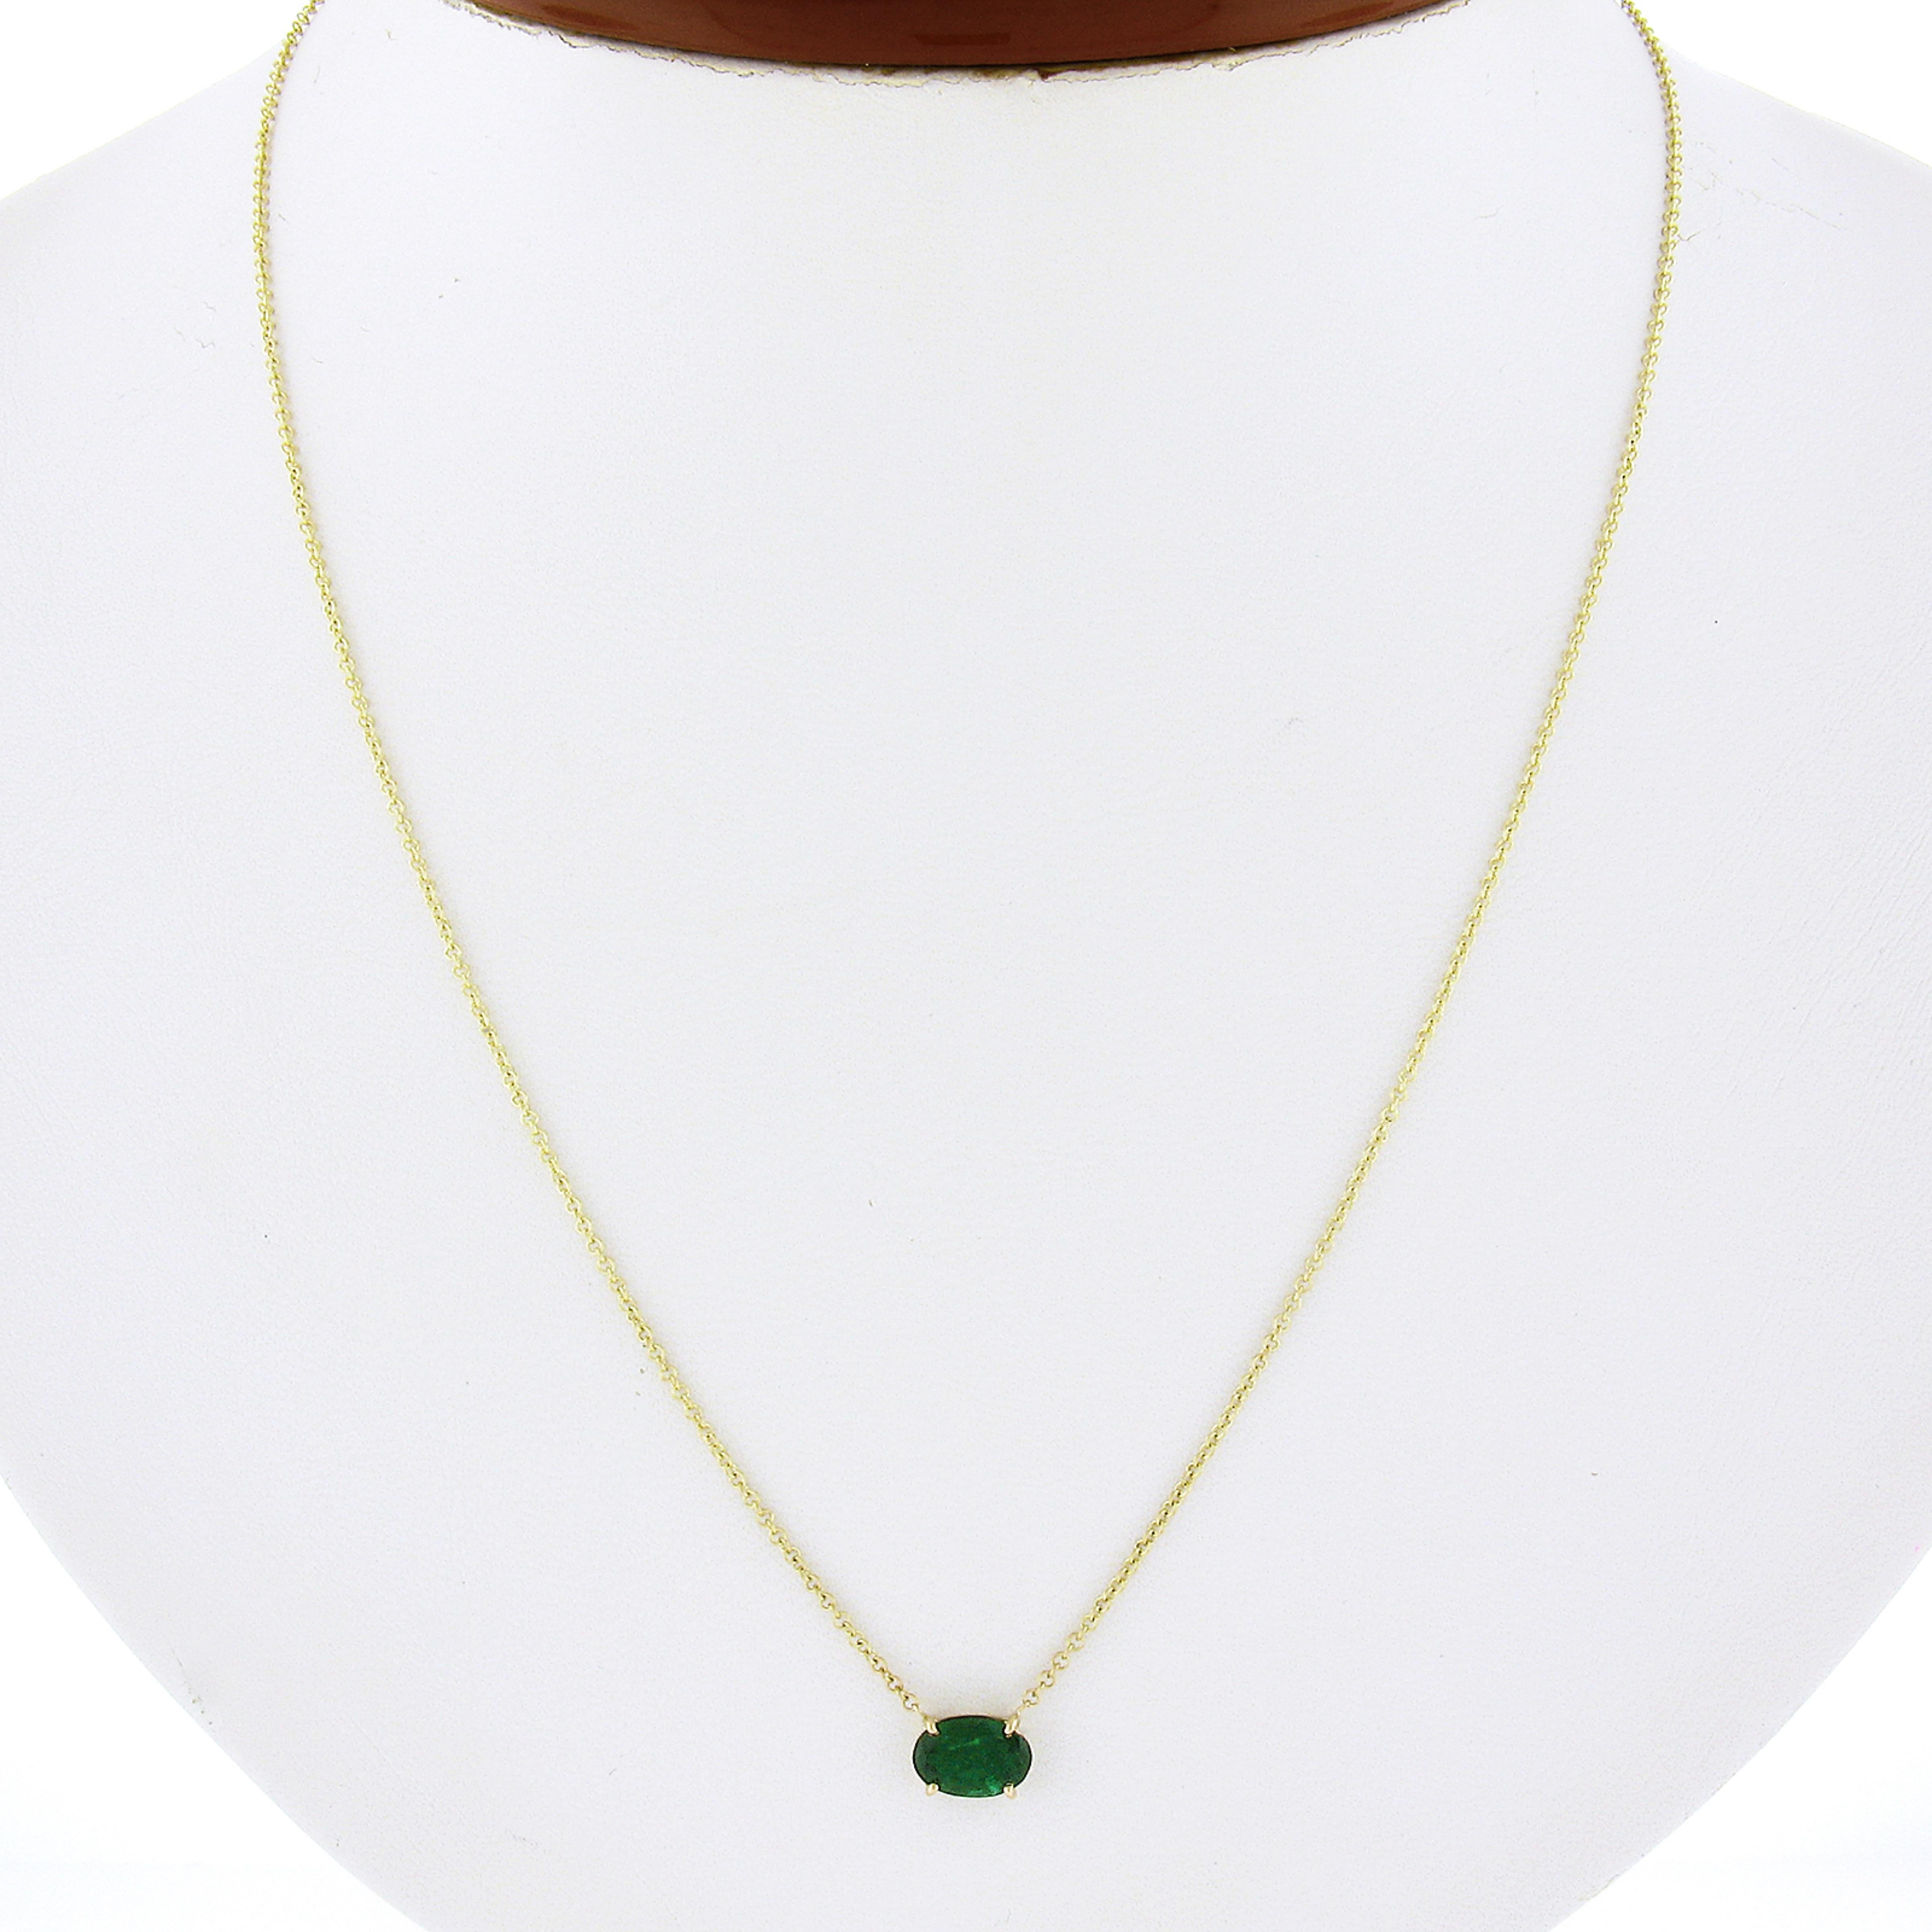 This amazing petite solitaire pendant necklace is newly crafted in solid 14k yellow gold and features a very fine natural emerald gemstone that is neatly prong set in a sturdy basket setting at the center. This gorgeous stone is oval cut and set